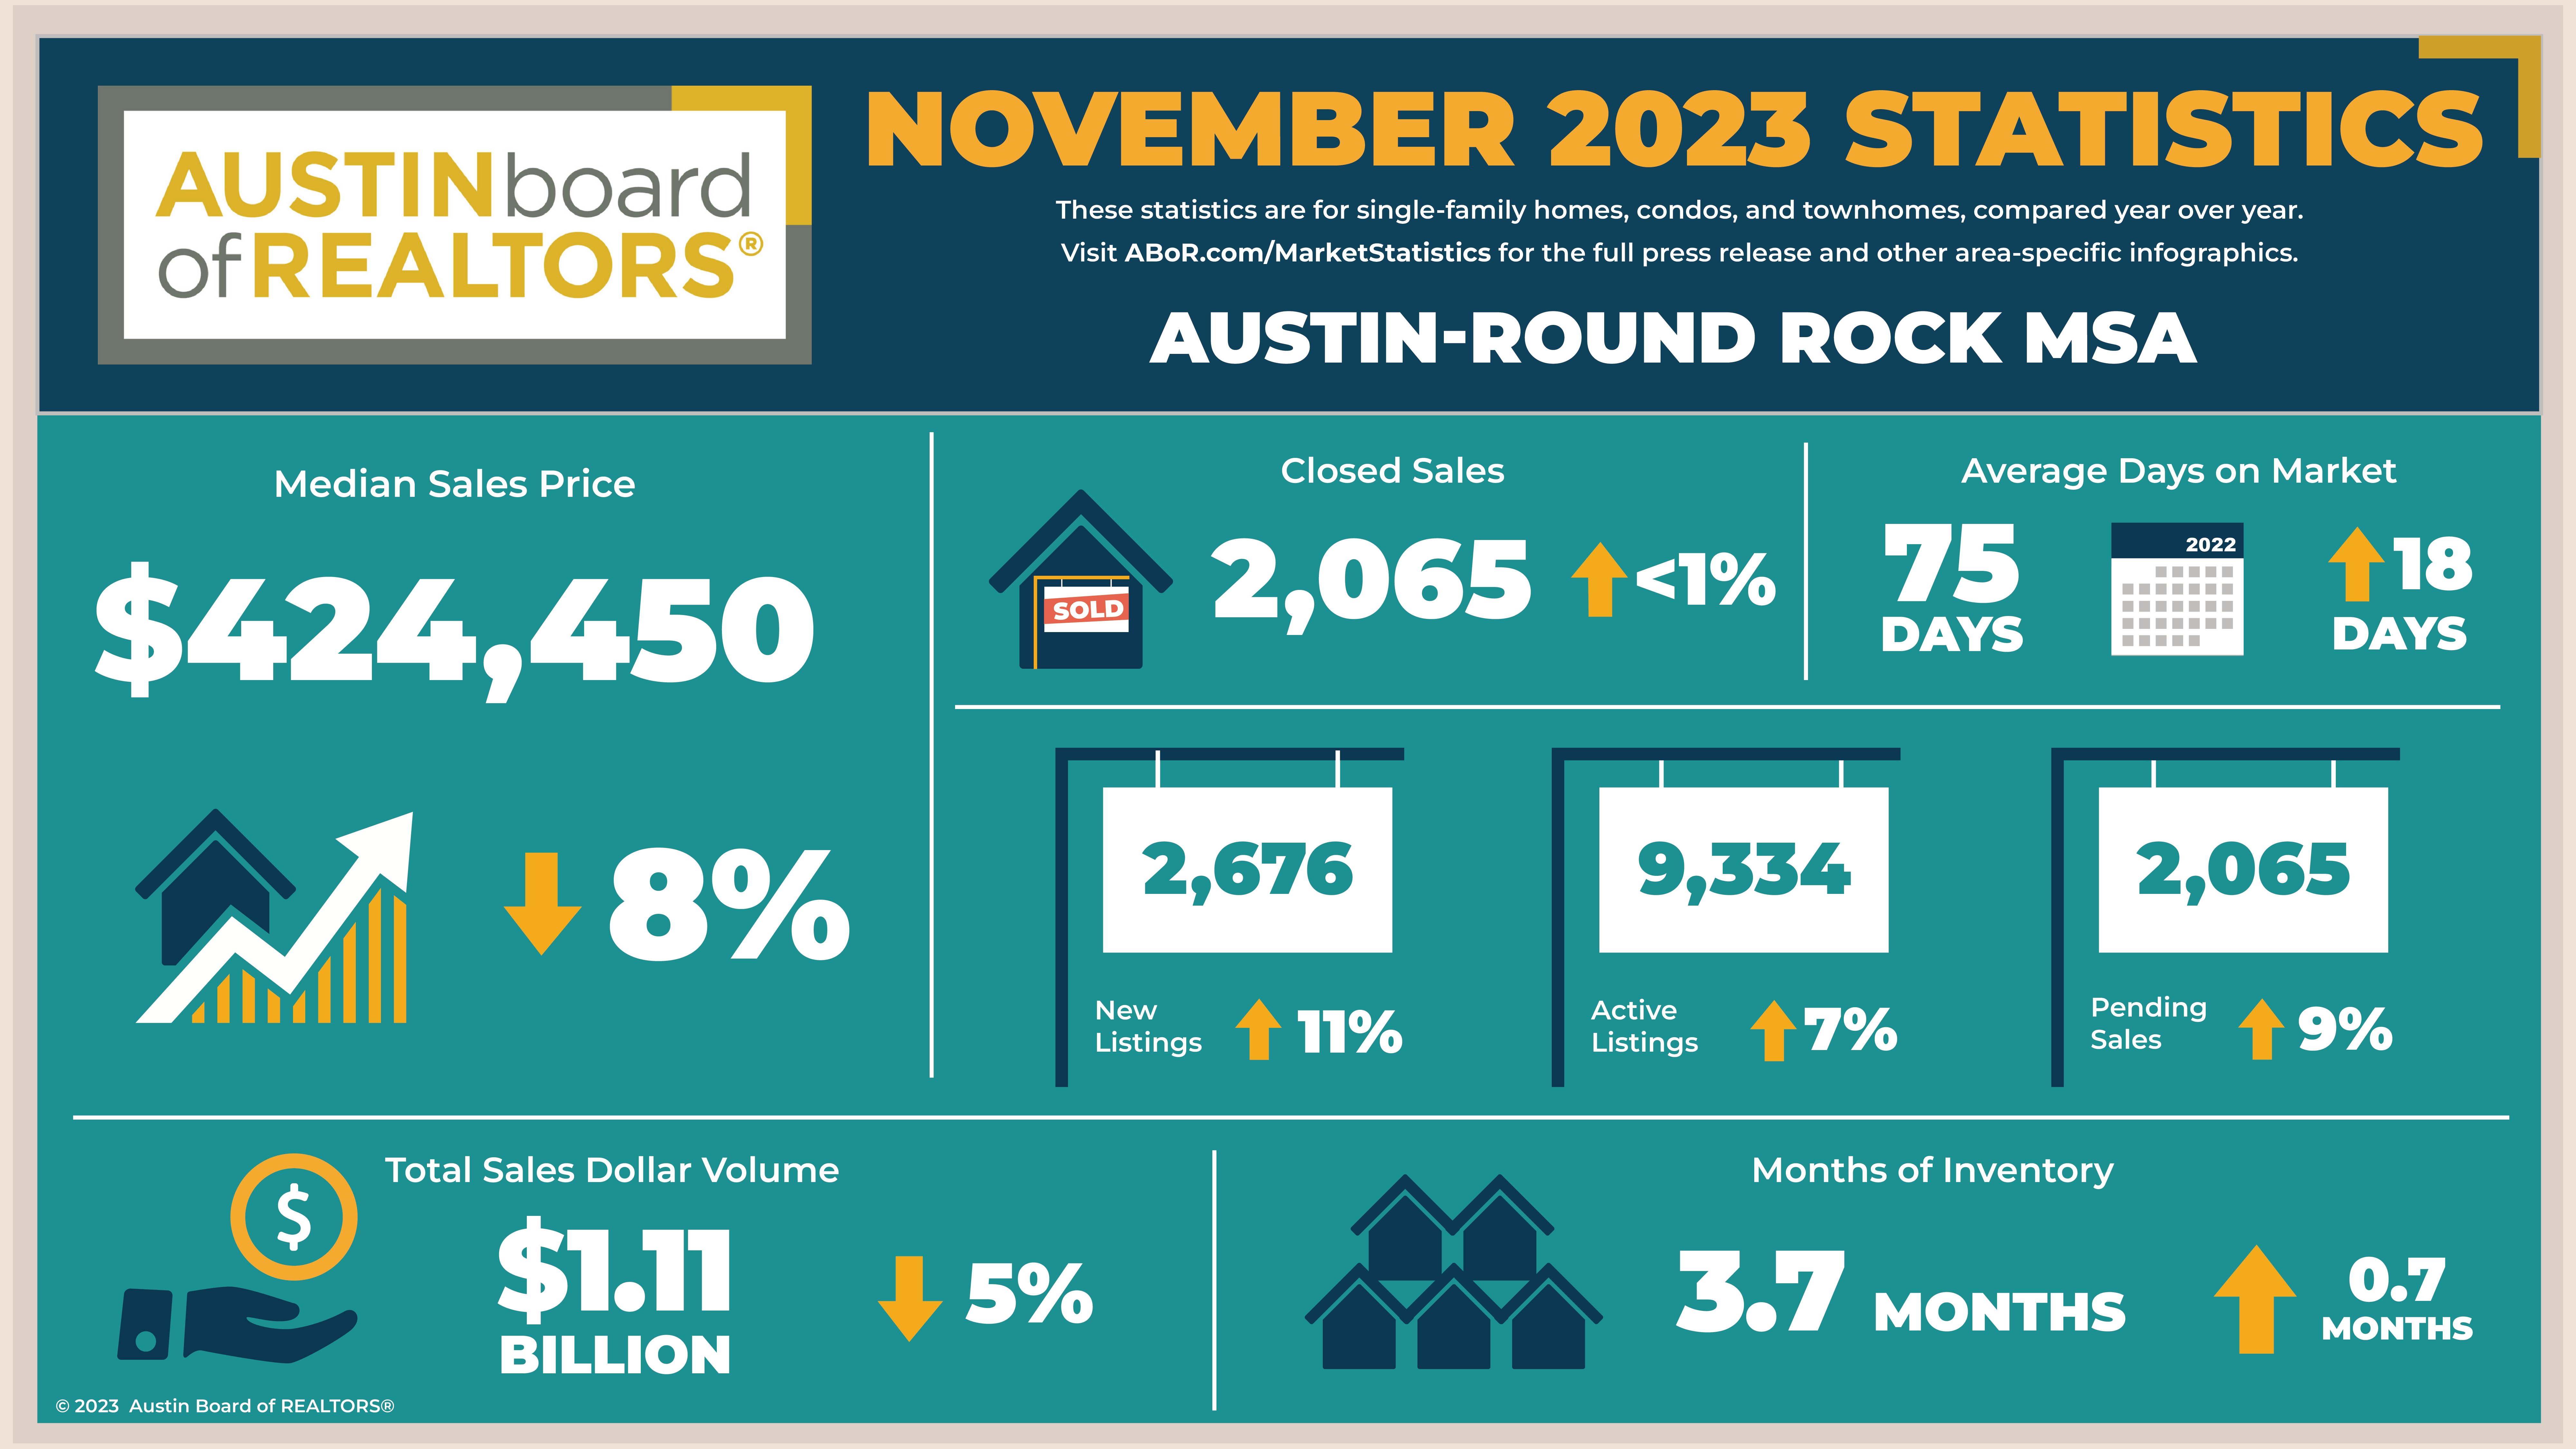 This image shows the real estate market statics for the Austin-RR area for the month of November 2023.